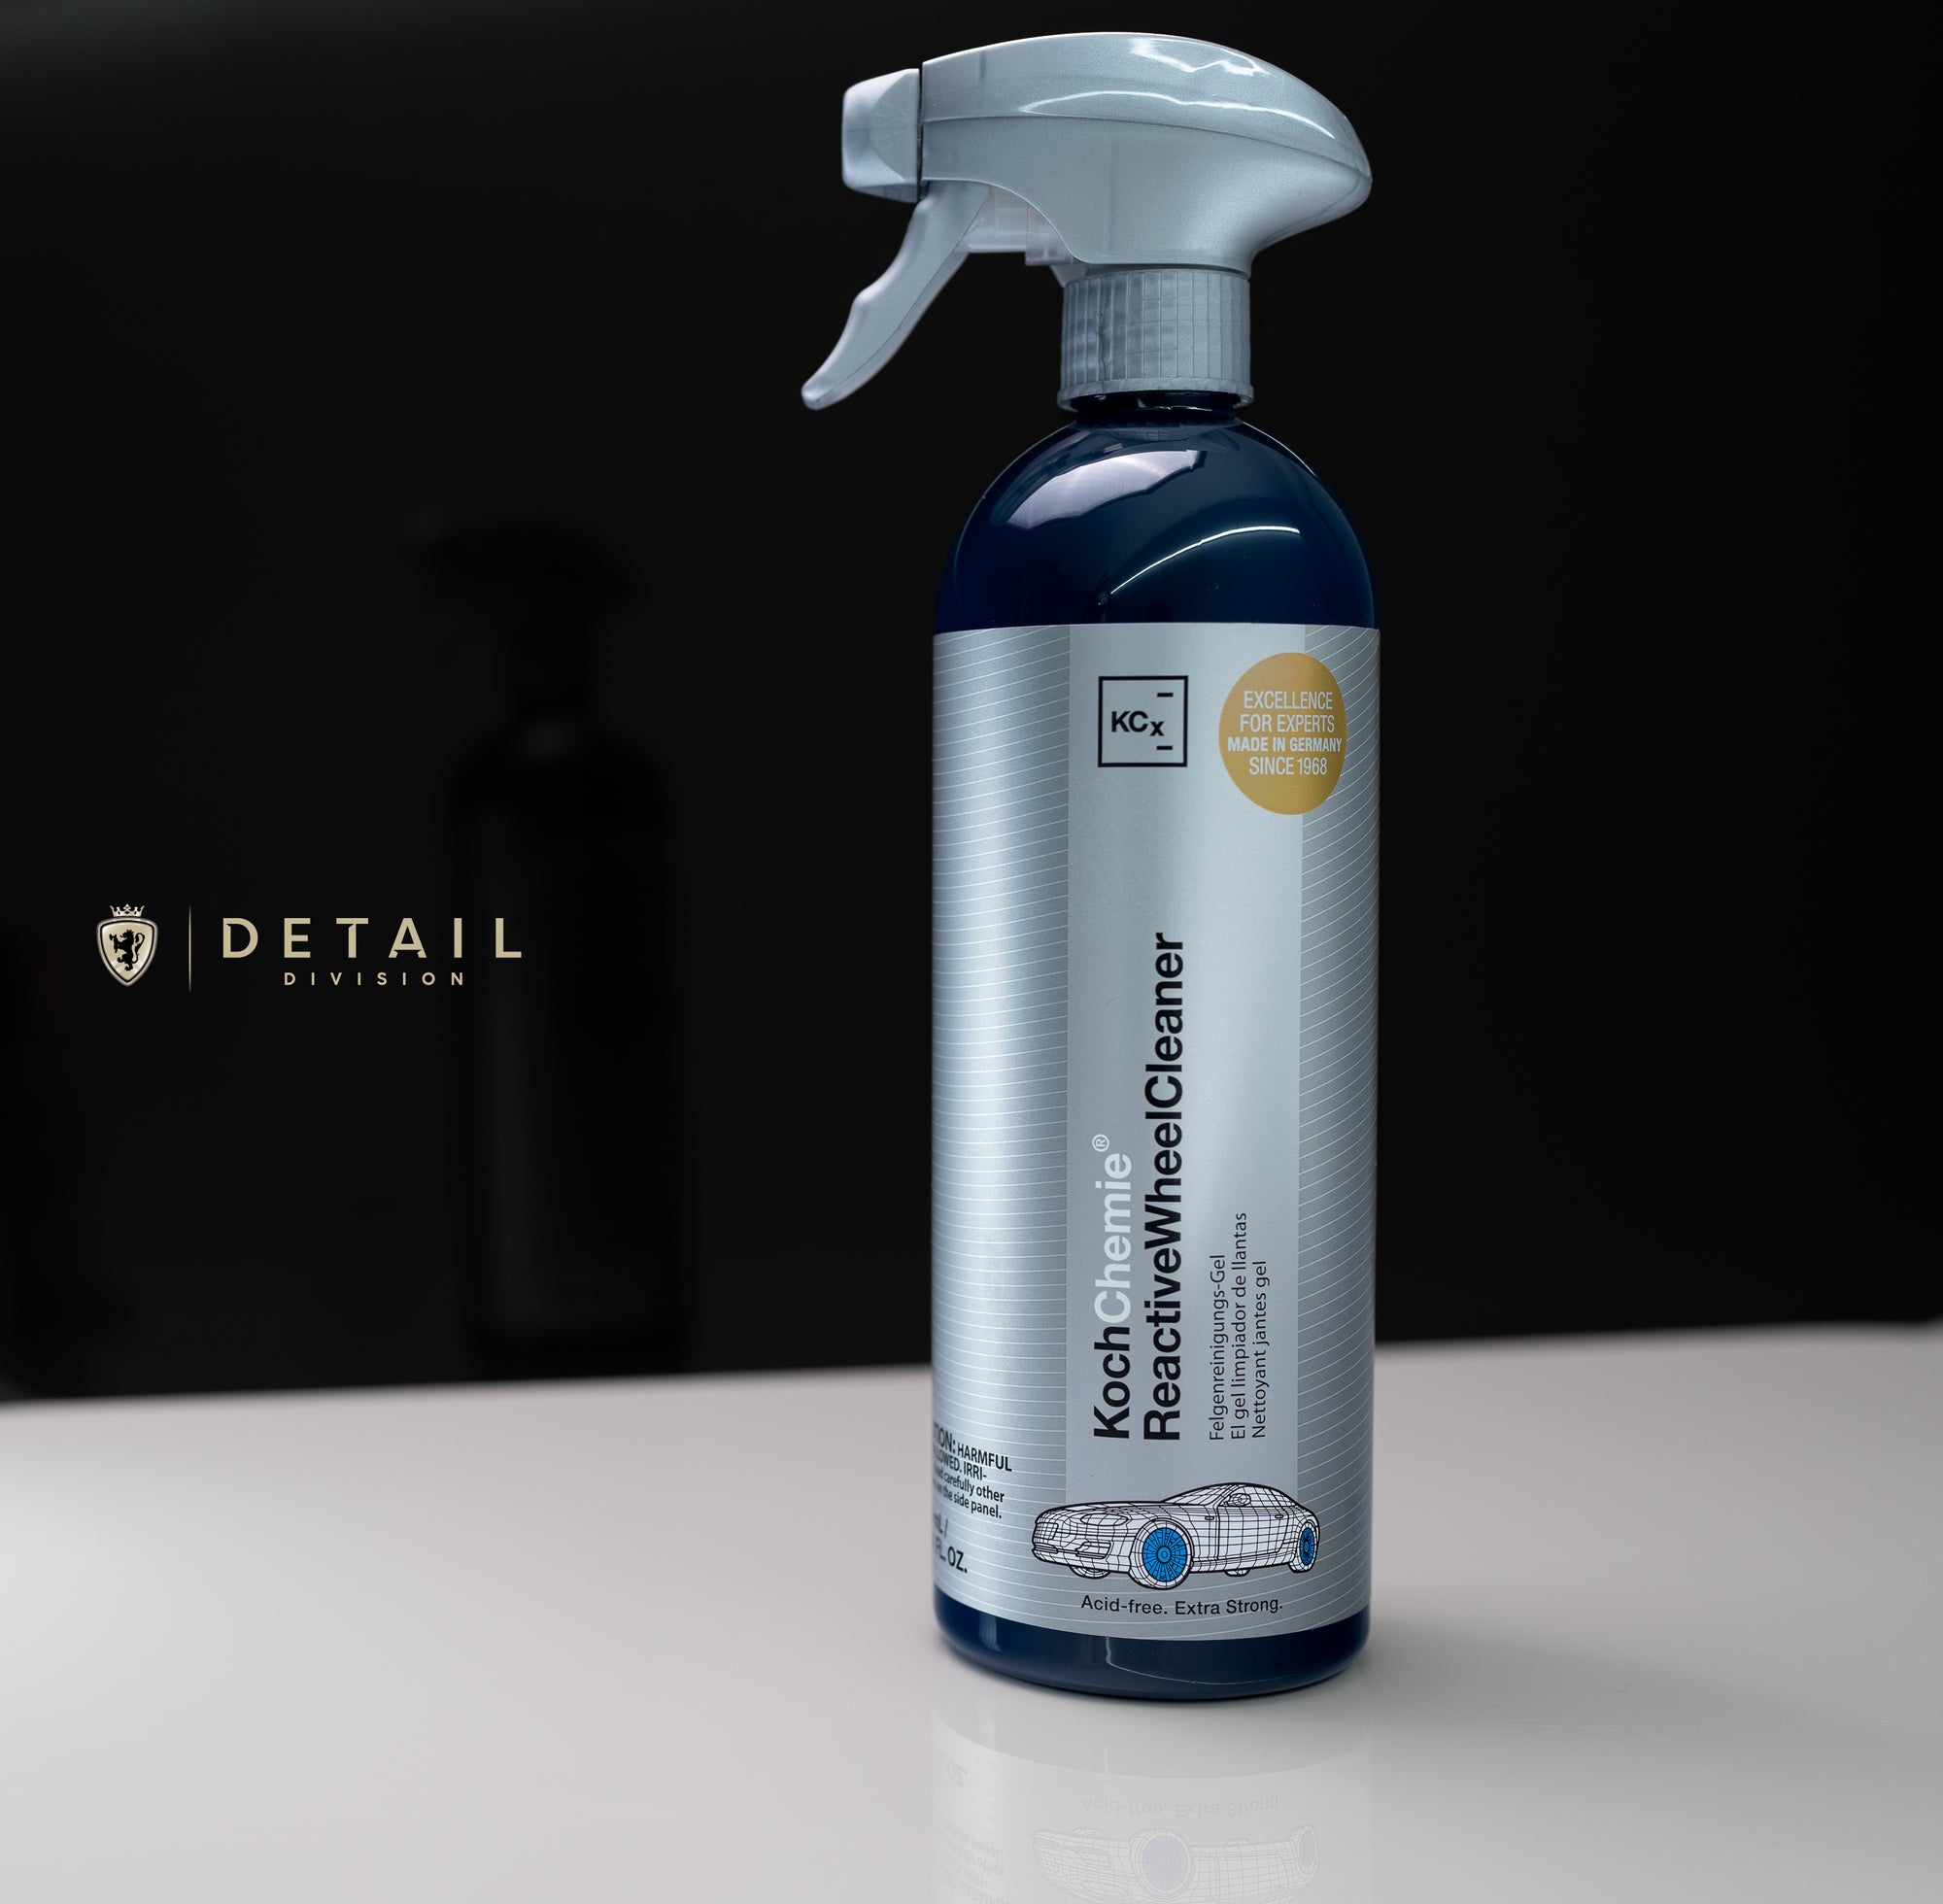 what do you think about the brand KOCHCHEMIE : r/AutoDetailing